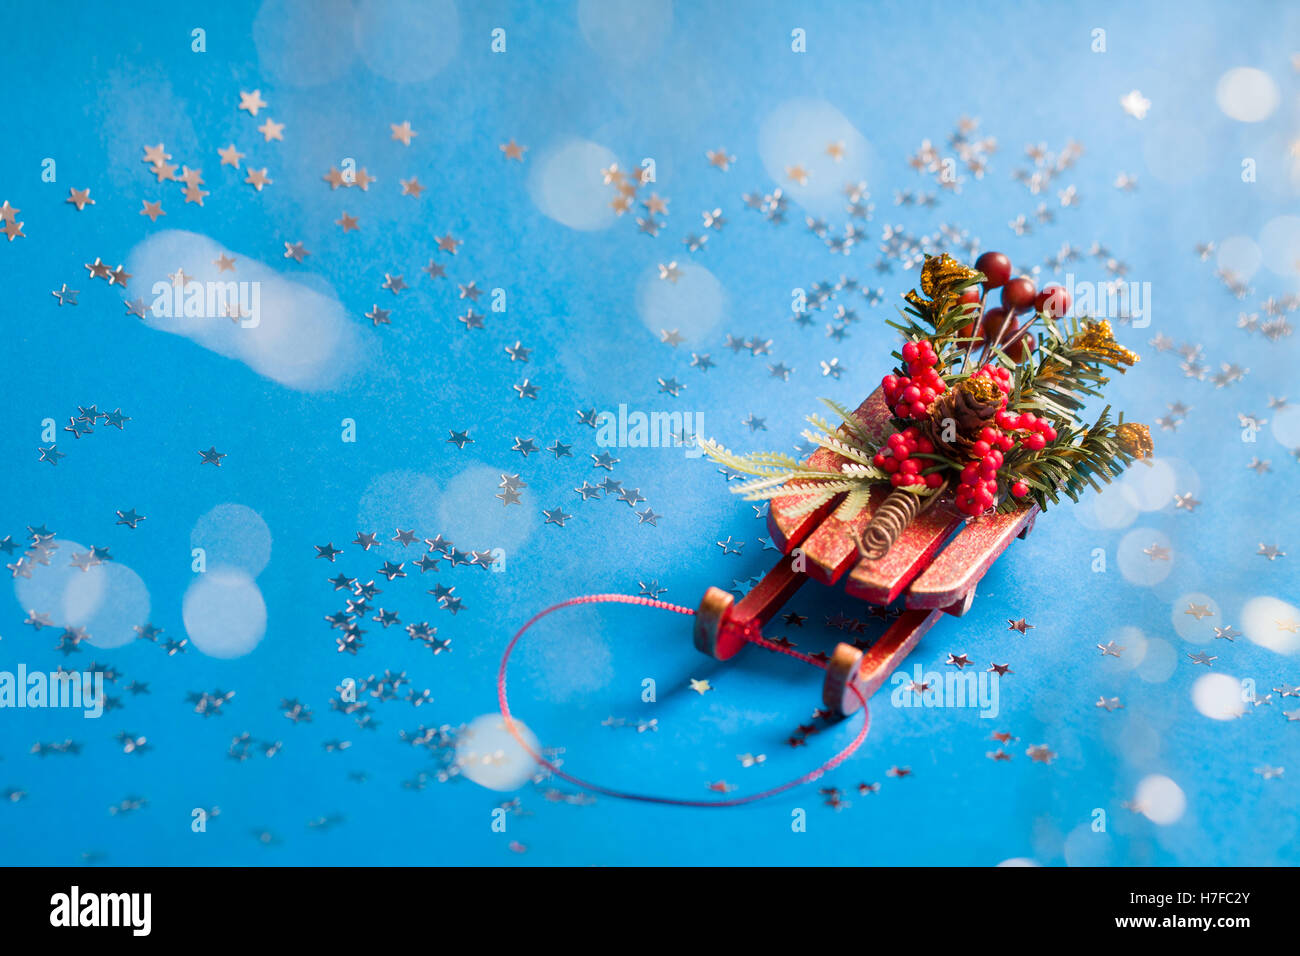 Christmas card with shine silver star and decorative sled standing on blue background in blurred glow balls. Stock Photo